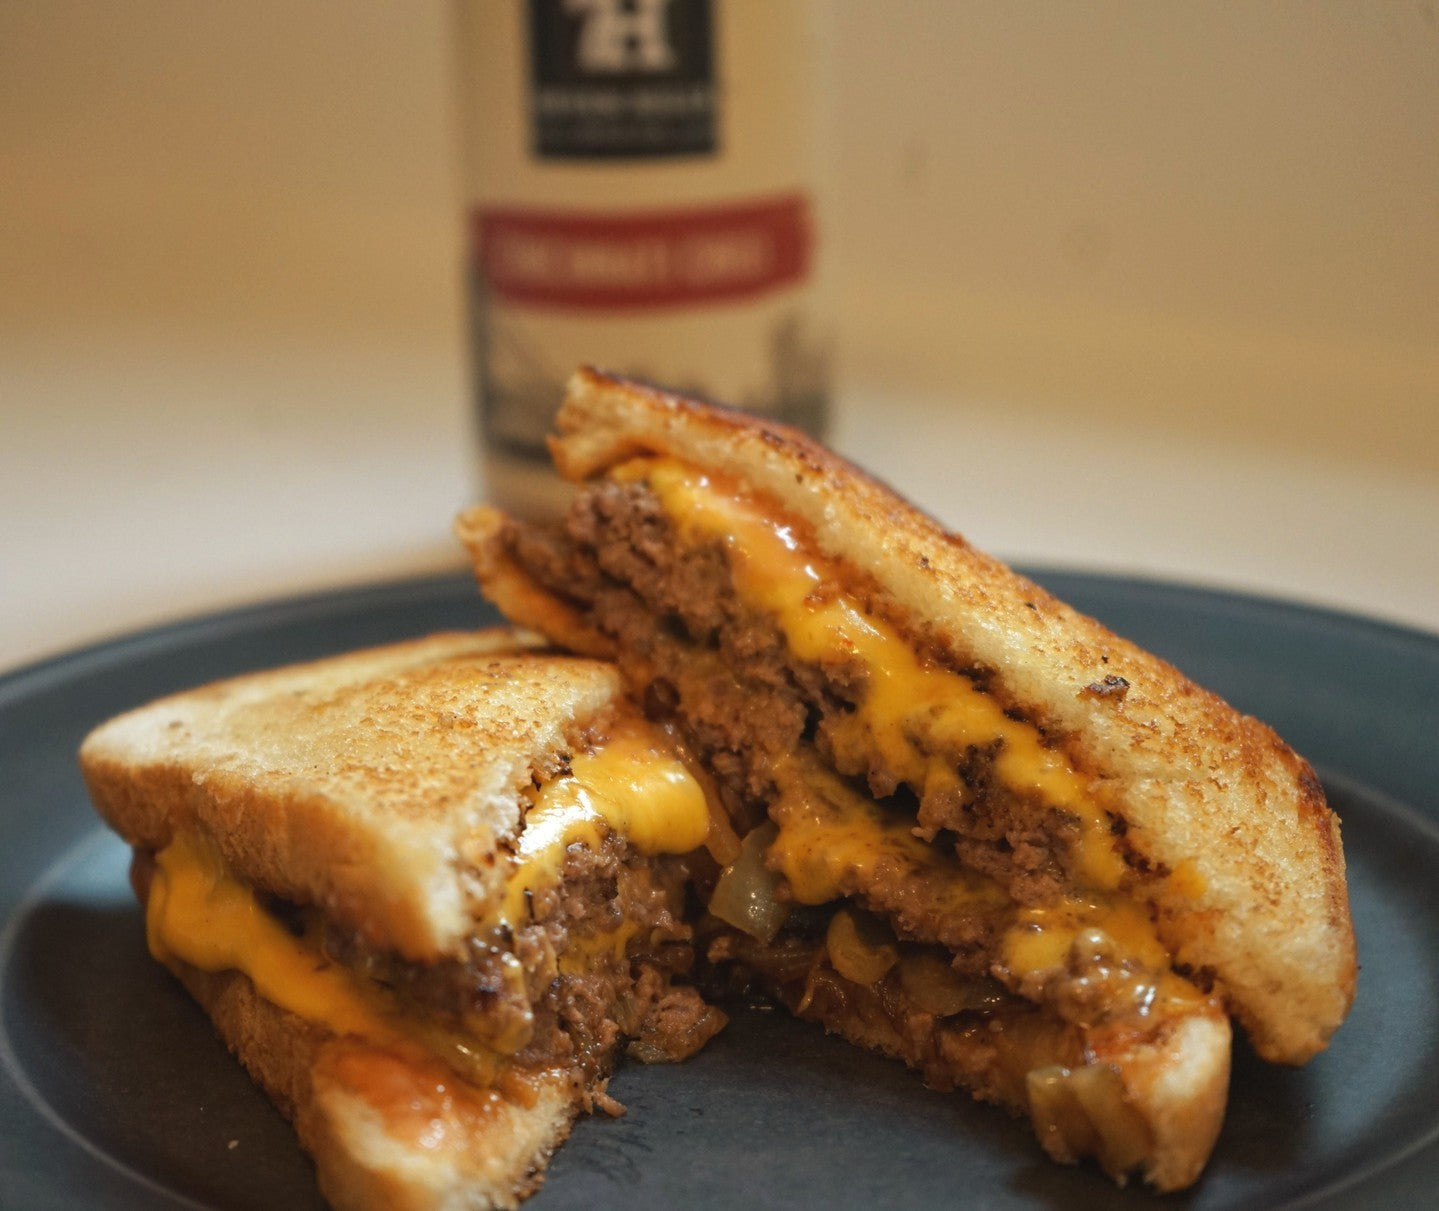 Seven hills for an extra umph in a beefy grilled cheese